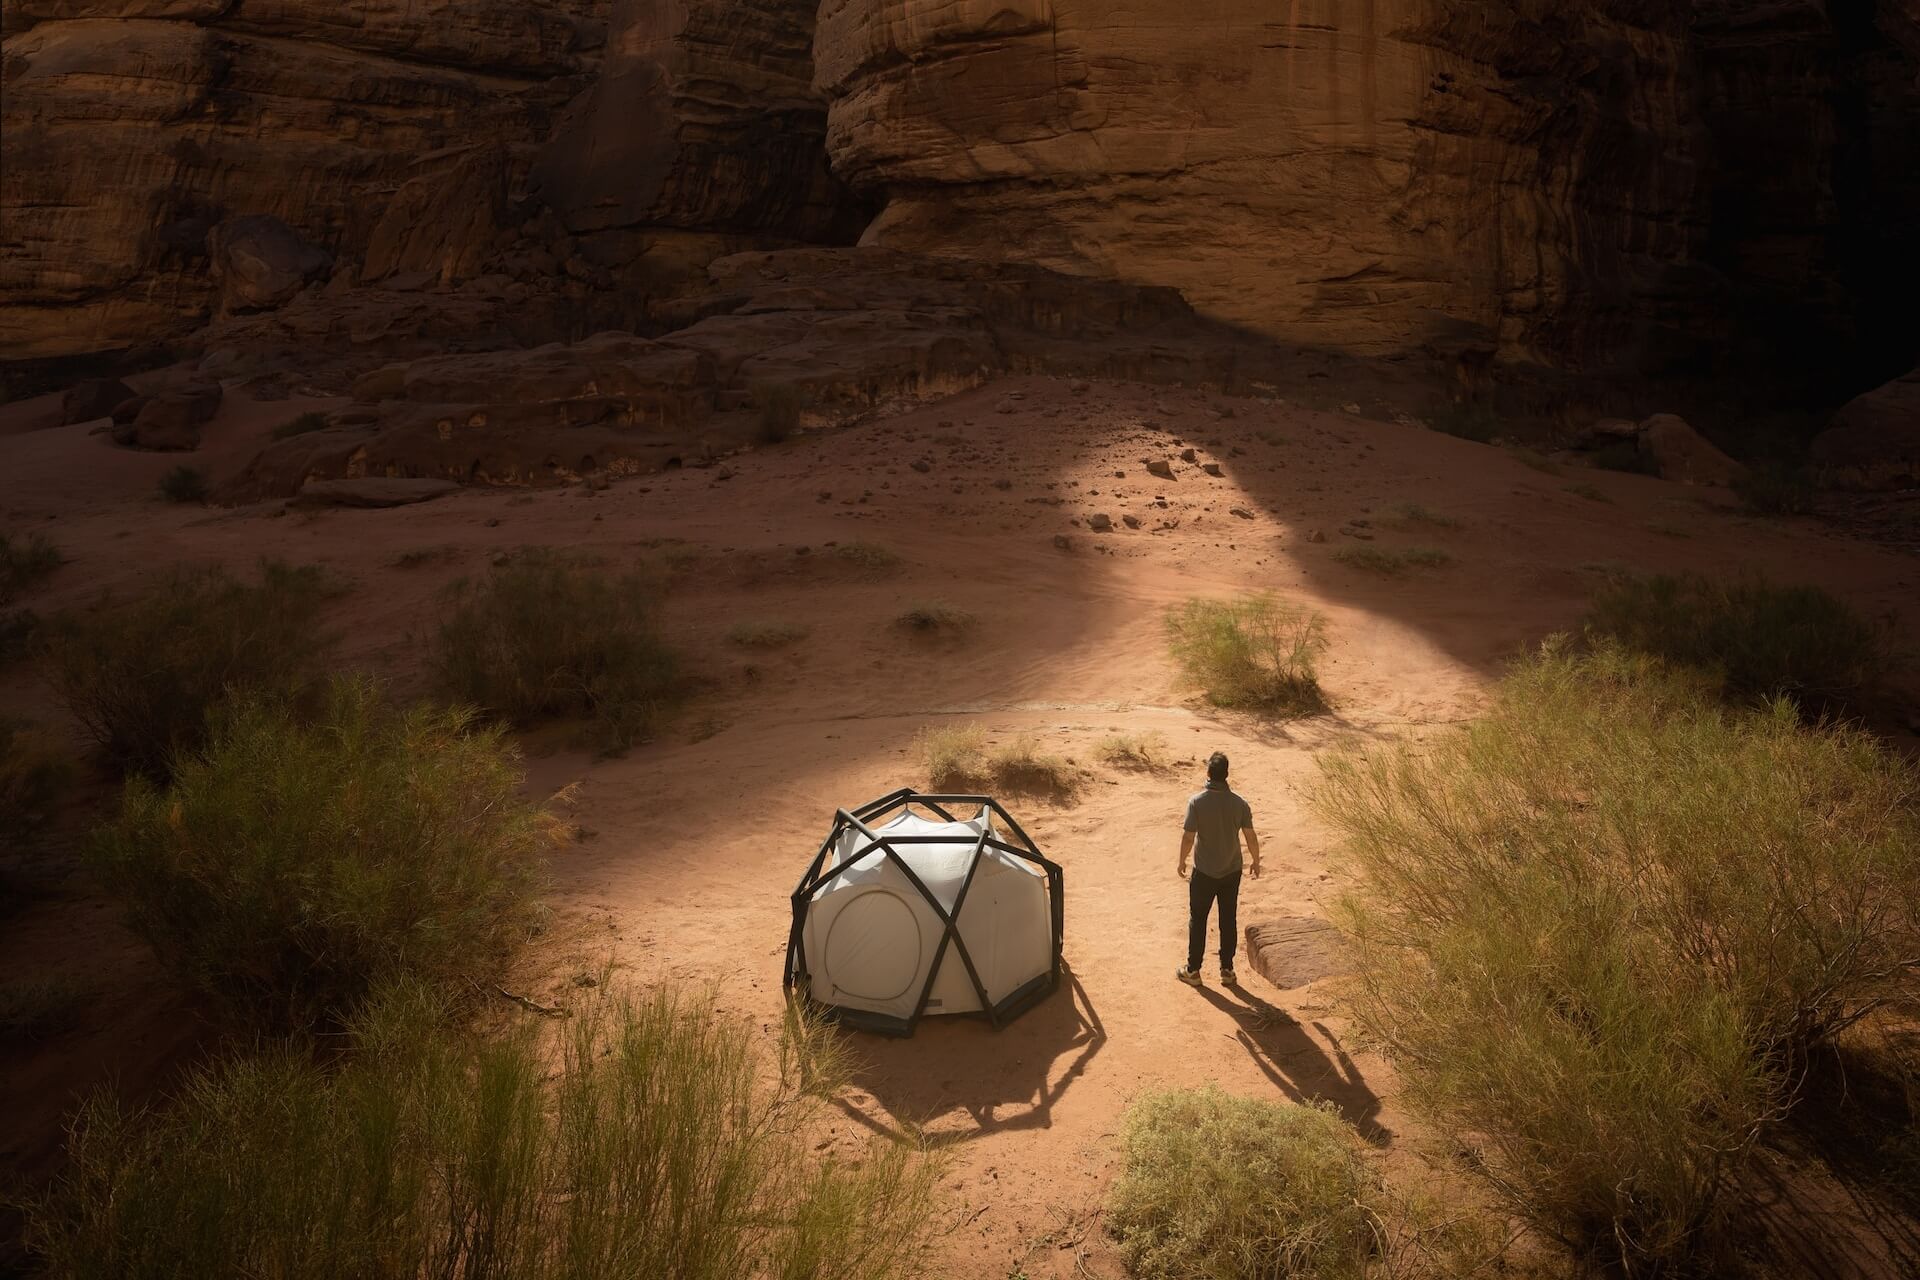 Man standing next to a tent in the desert